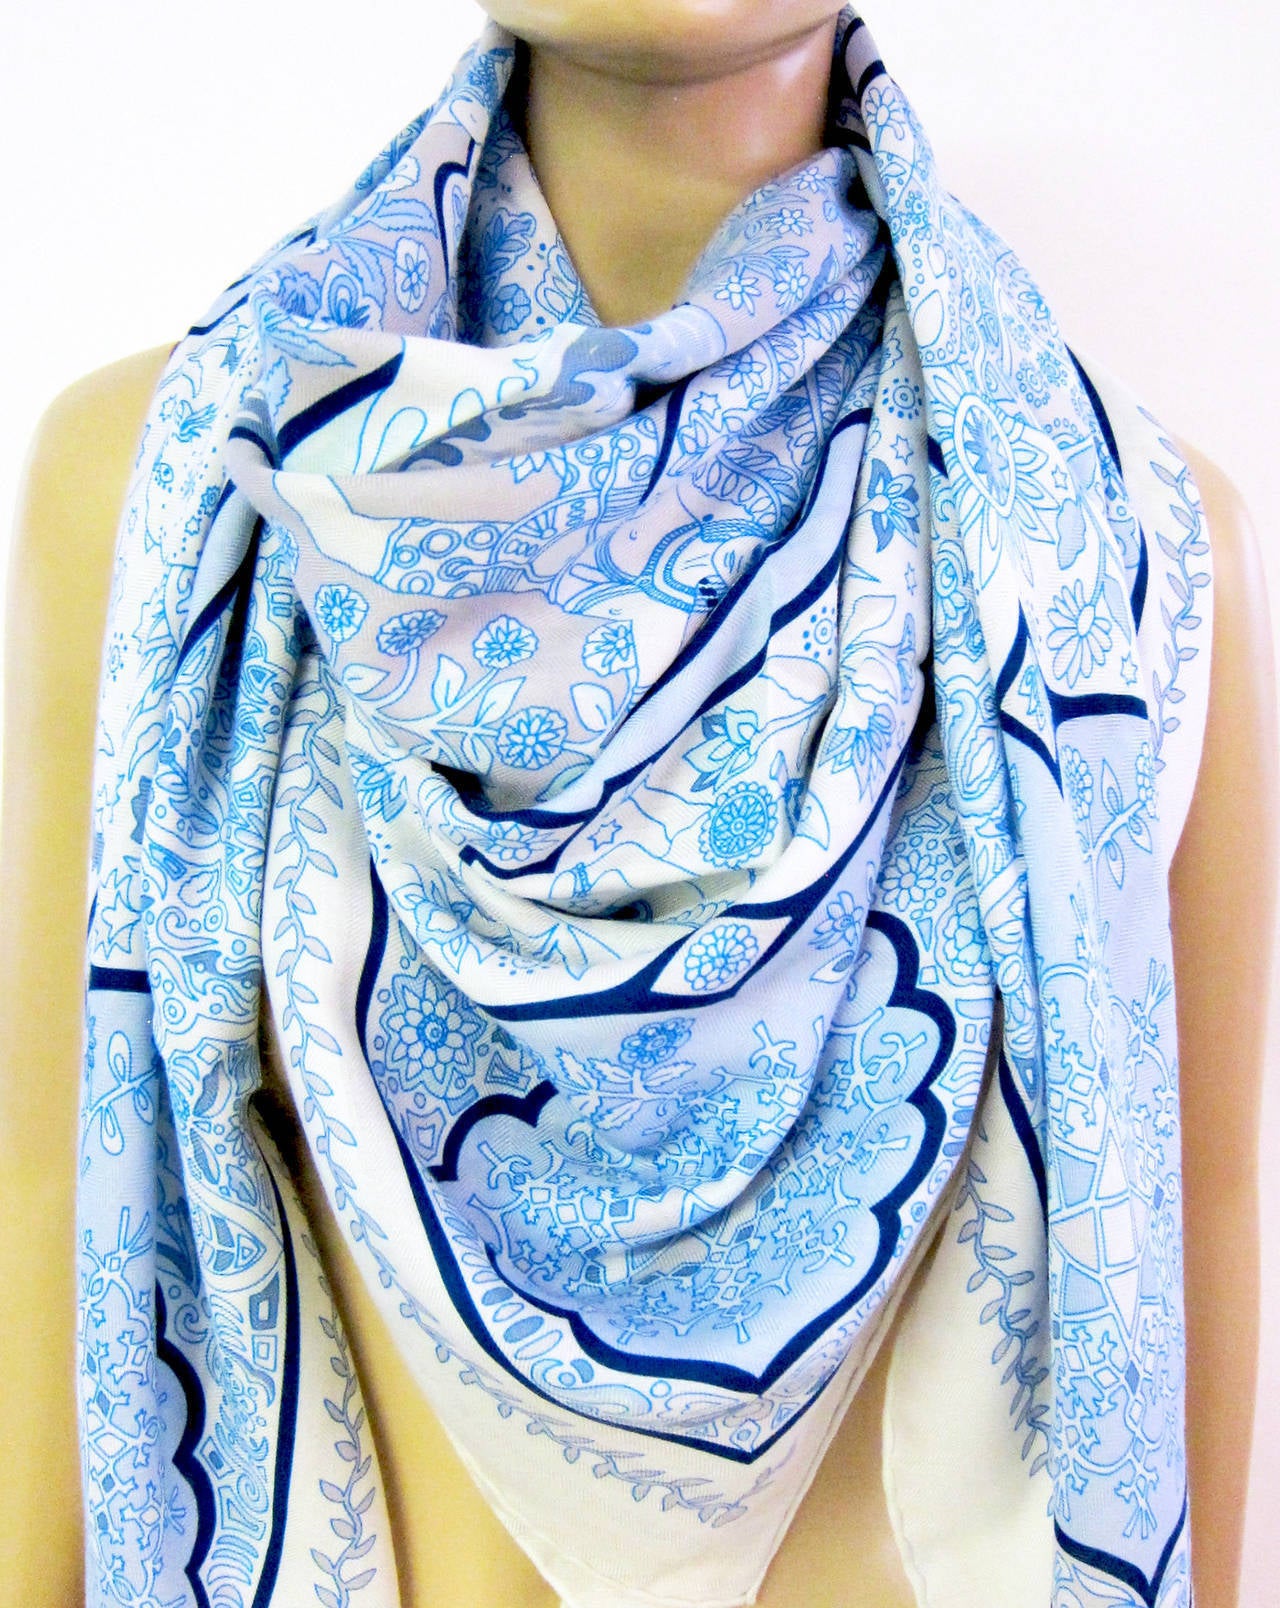 HERMES Aux Portes du Palais Cashmere Silk GM Shawl Scarf

Colors: White, Light Grey, Light Blue, Dark Blue 
Brand new in box. Absolutely store fresh coming with Hermes box and ribbon.
Sold out!  
Gorgeous details
Very versatile colorway with